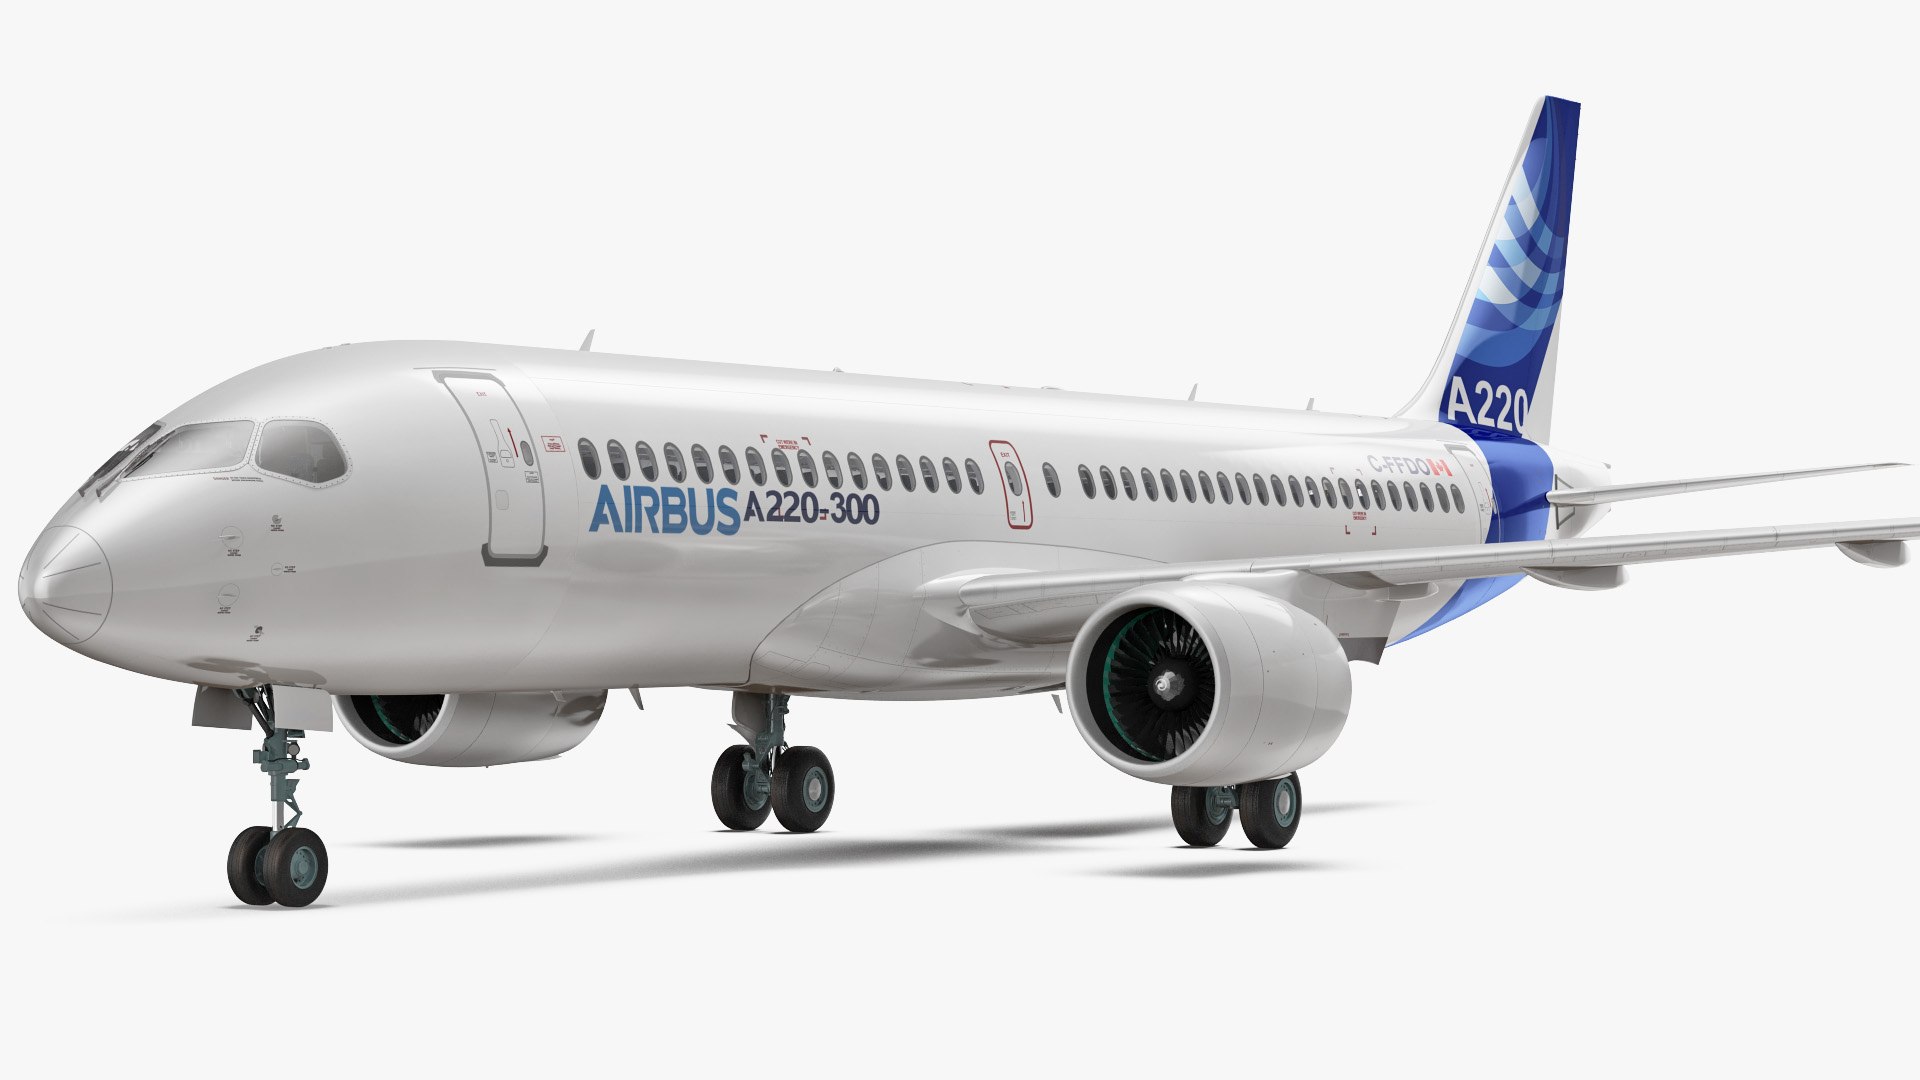 File:Airbus A220-300.jpg - Wikimedia Commons